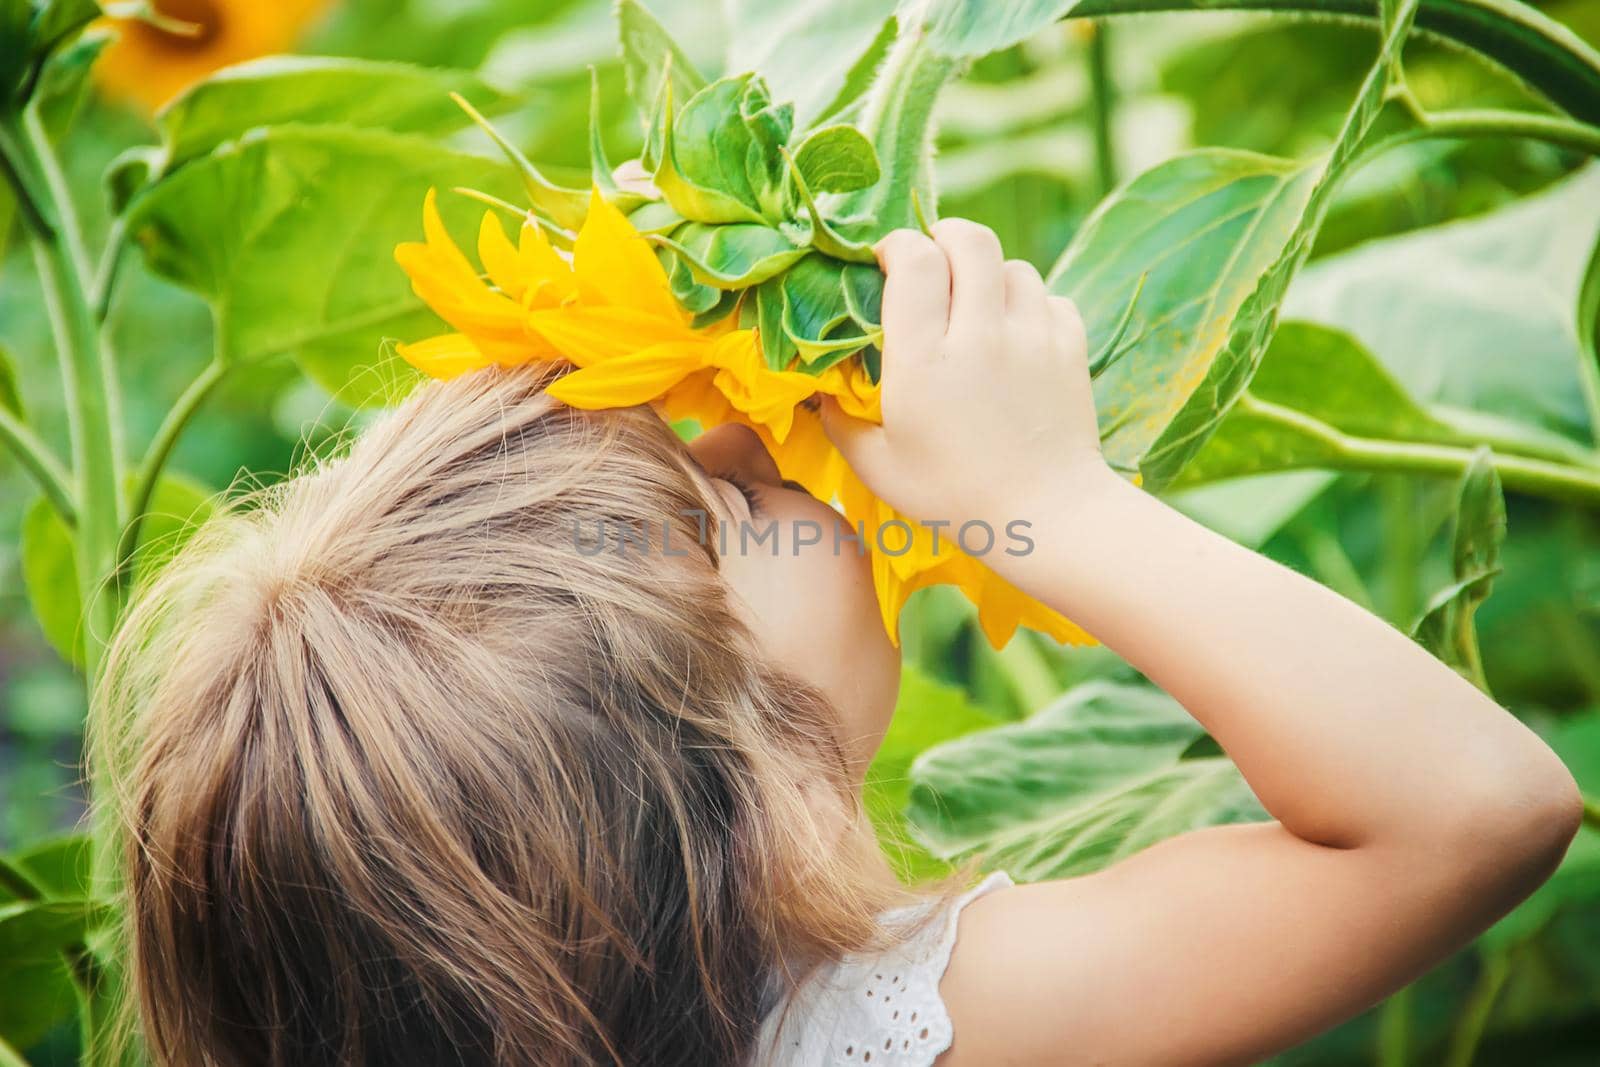 child in the field of sunflowers is a small farmer. selective focus.